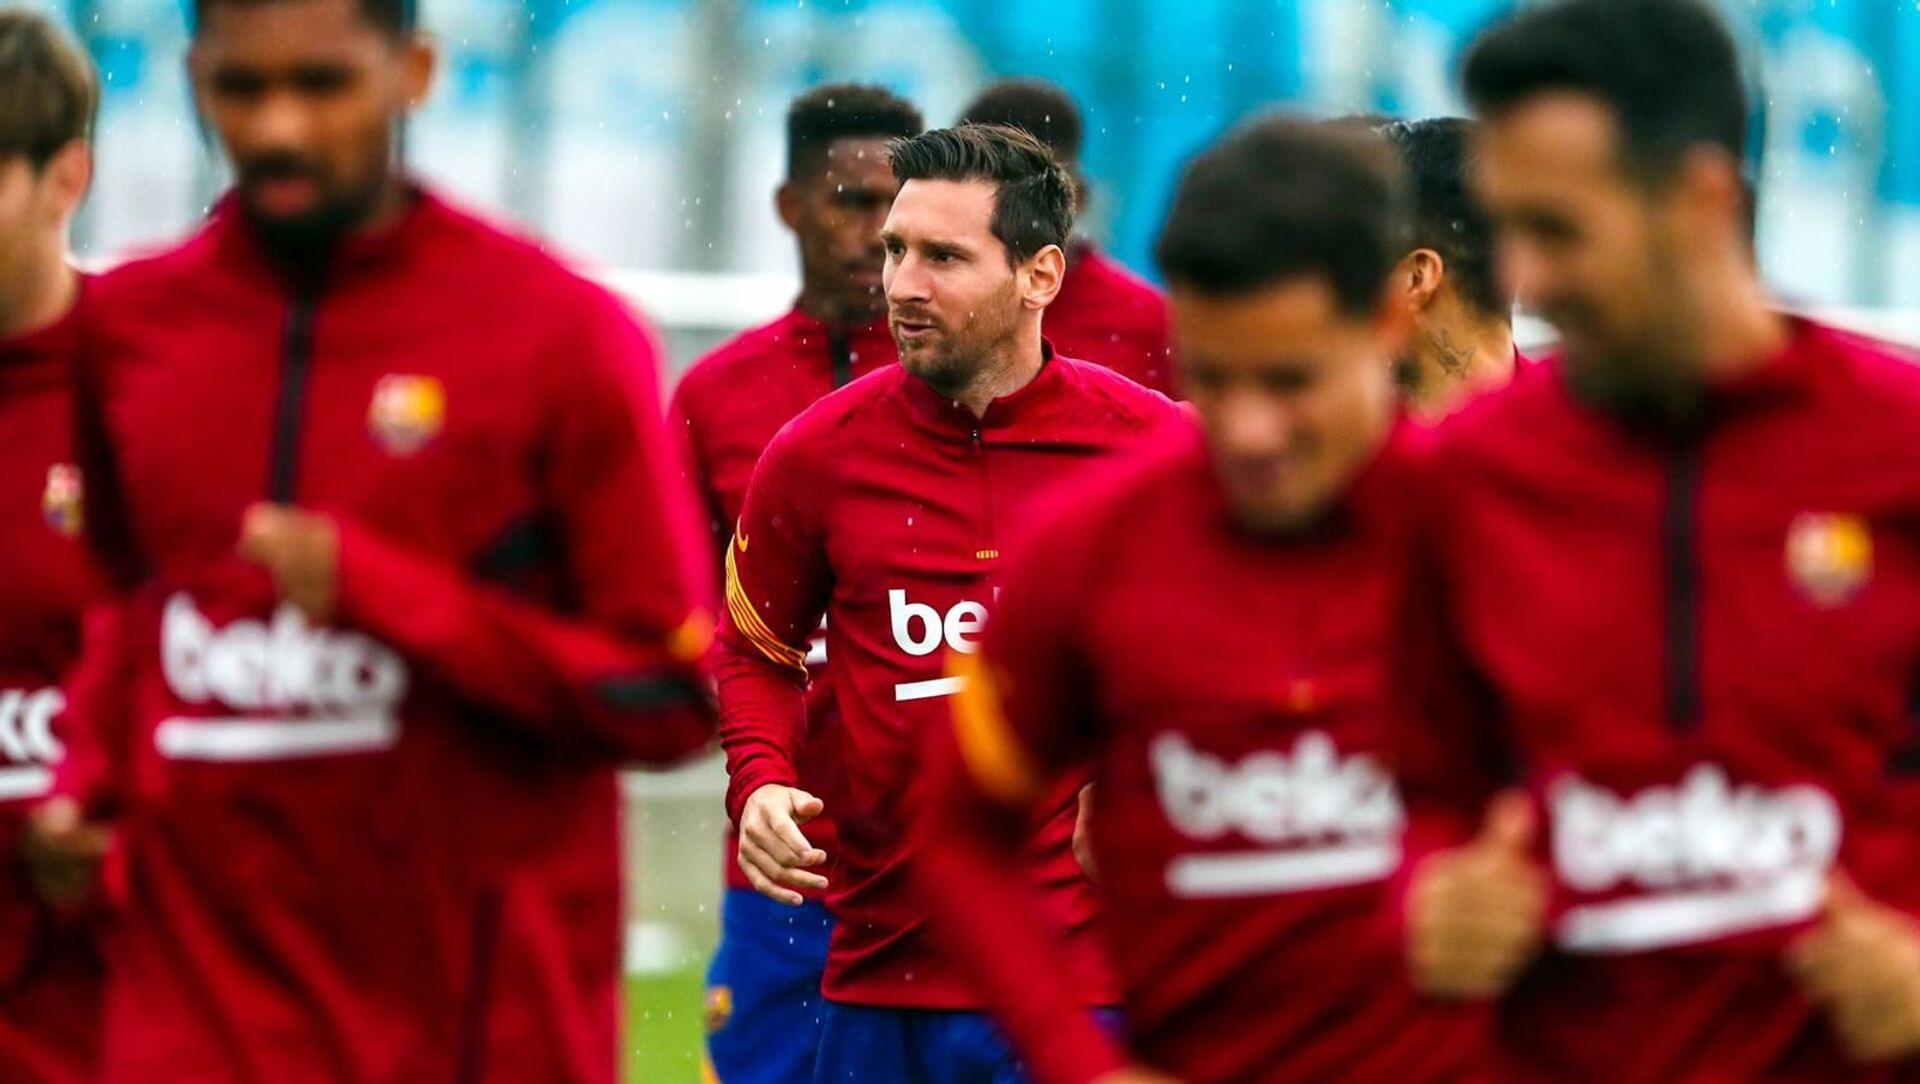 First workout of the day Lionel Messi - اسپوتنیک افغانستان  , 1920, 09.03.2021